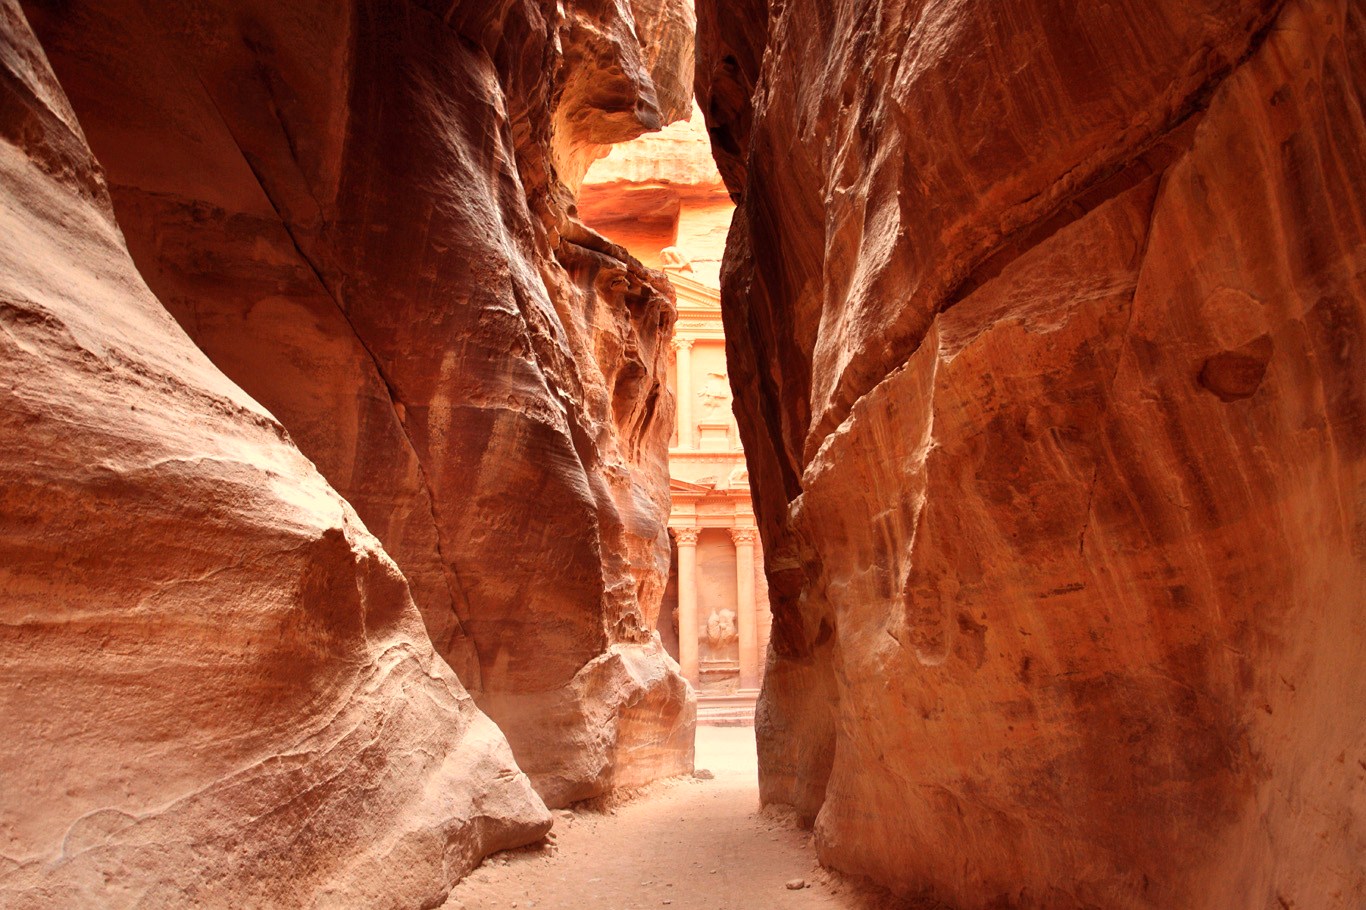 Petra in Jordan - Part 1 - The Treasury, The Ancient Rock City and The High Place of Sacrifice Trail — Adventurous Travels | Adventure Travel | Best Beaches | Off the